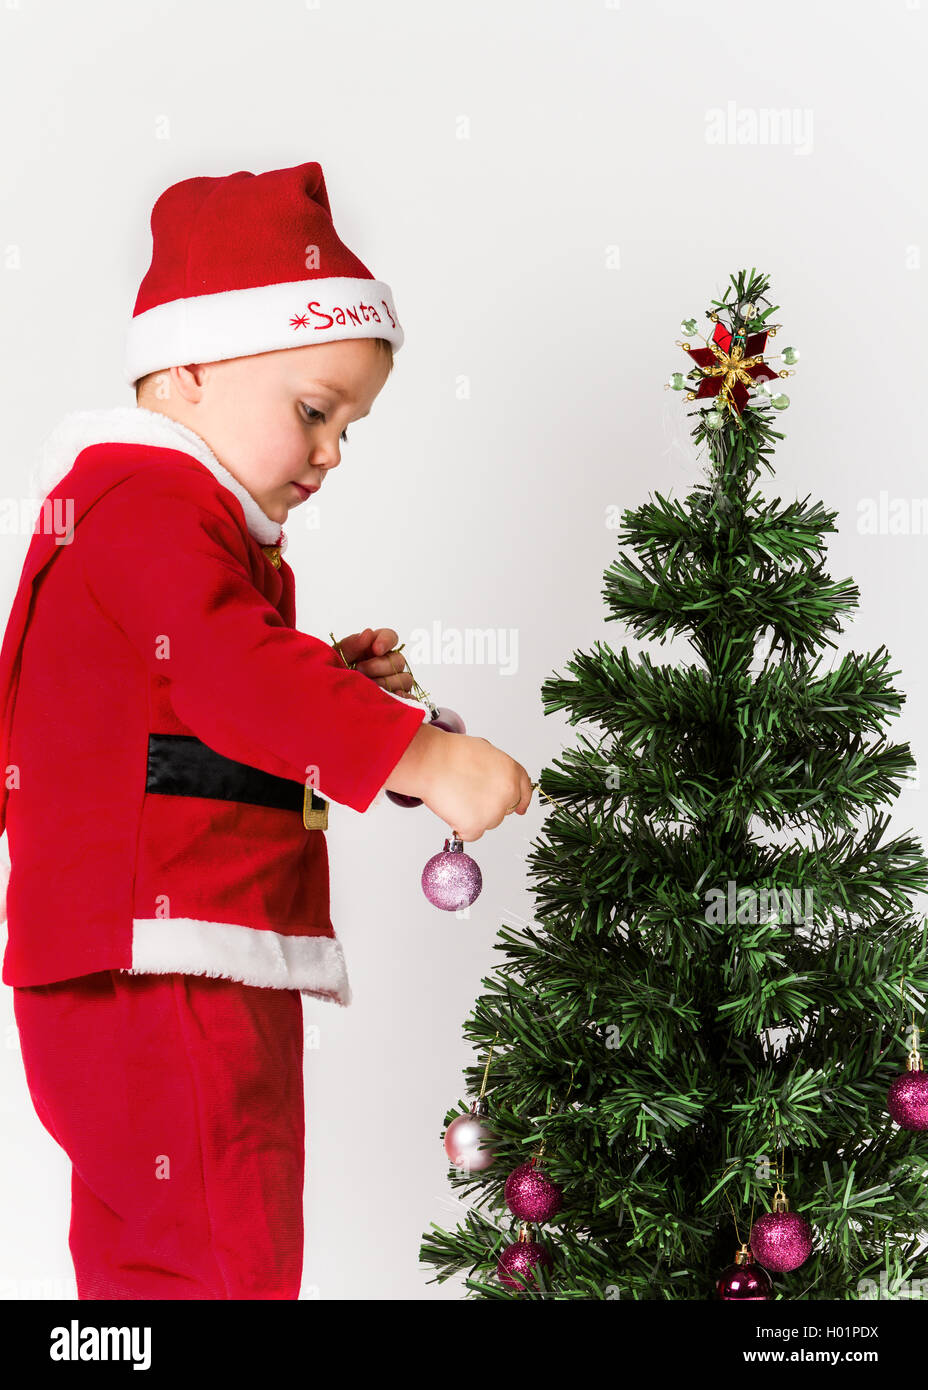 Baby boy dressed as Santa Claus decorating  Christmas tree, hanging ornaments. White background. Stock Photo